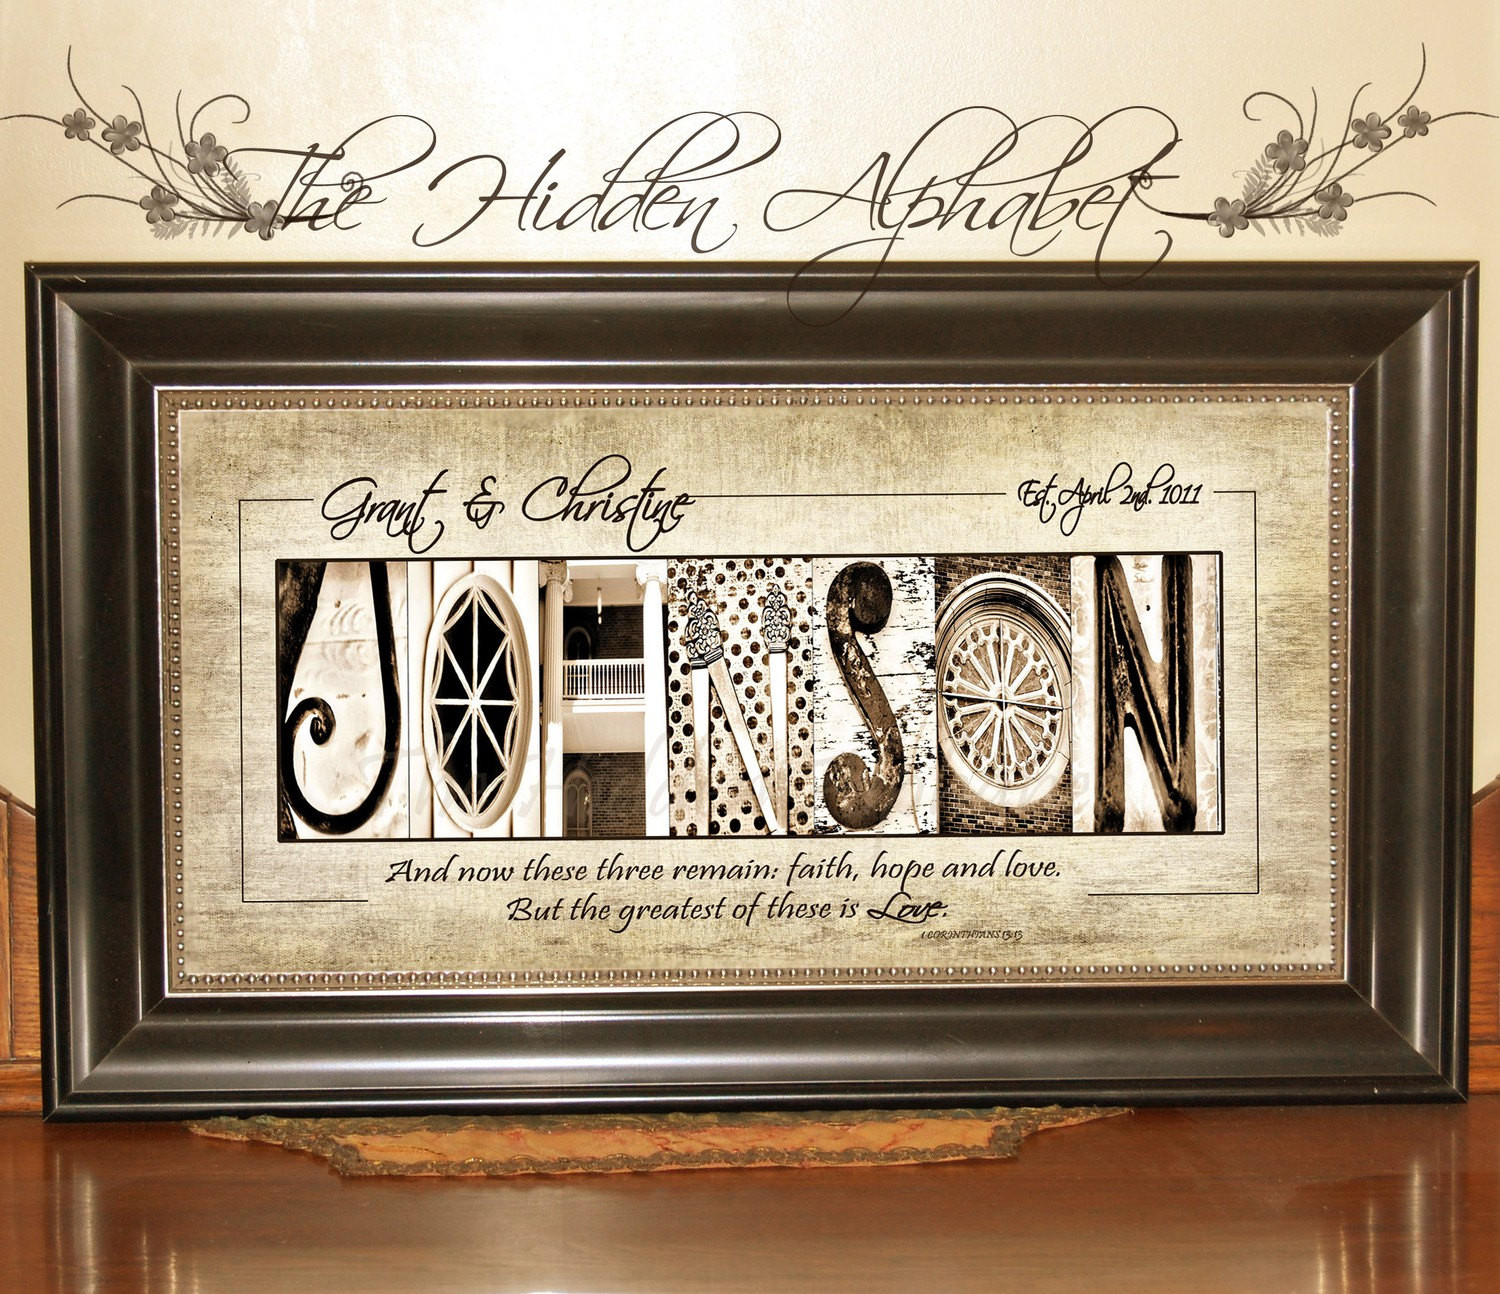 Christian Wedding Gift Ideas
 CHRISTIAN WEDDING Gift with SCRIPTURE Alphabet graphy